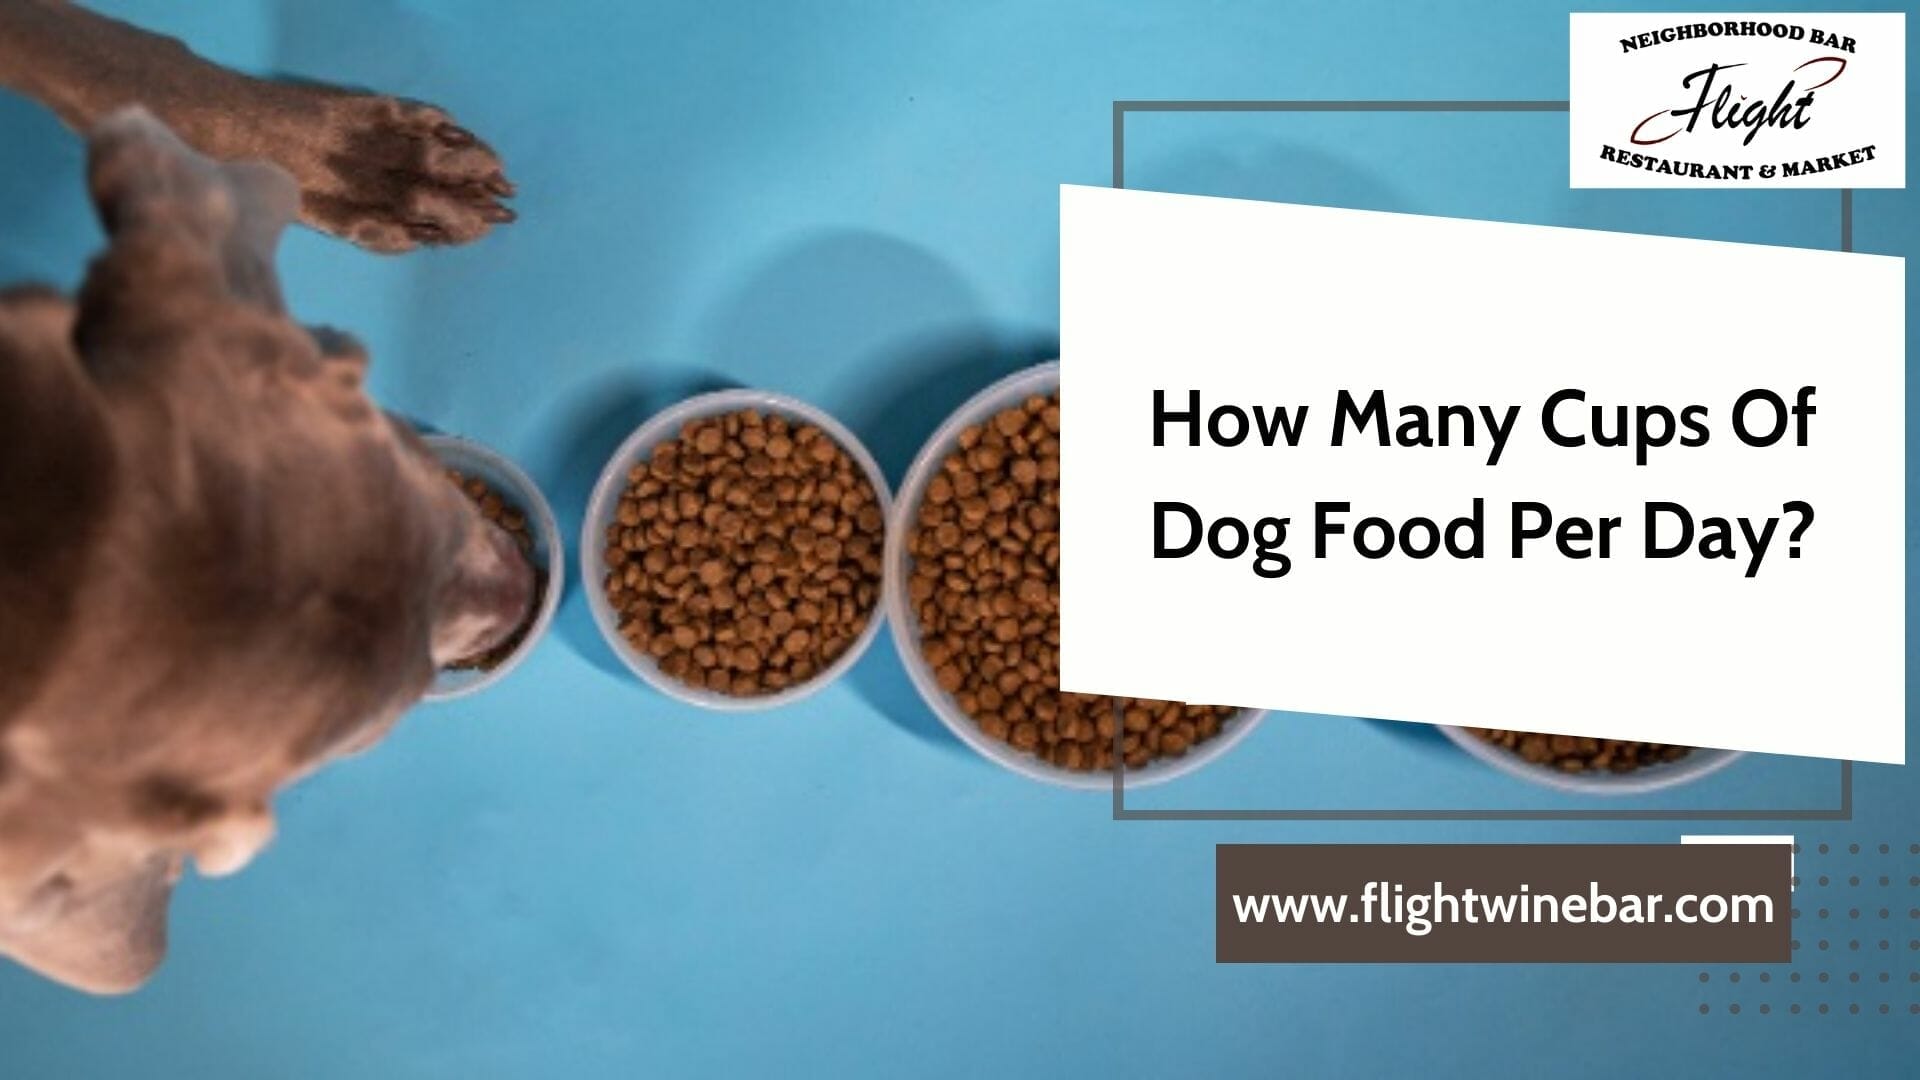 How Many Cups Of Dog Food Per Day